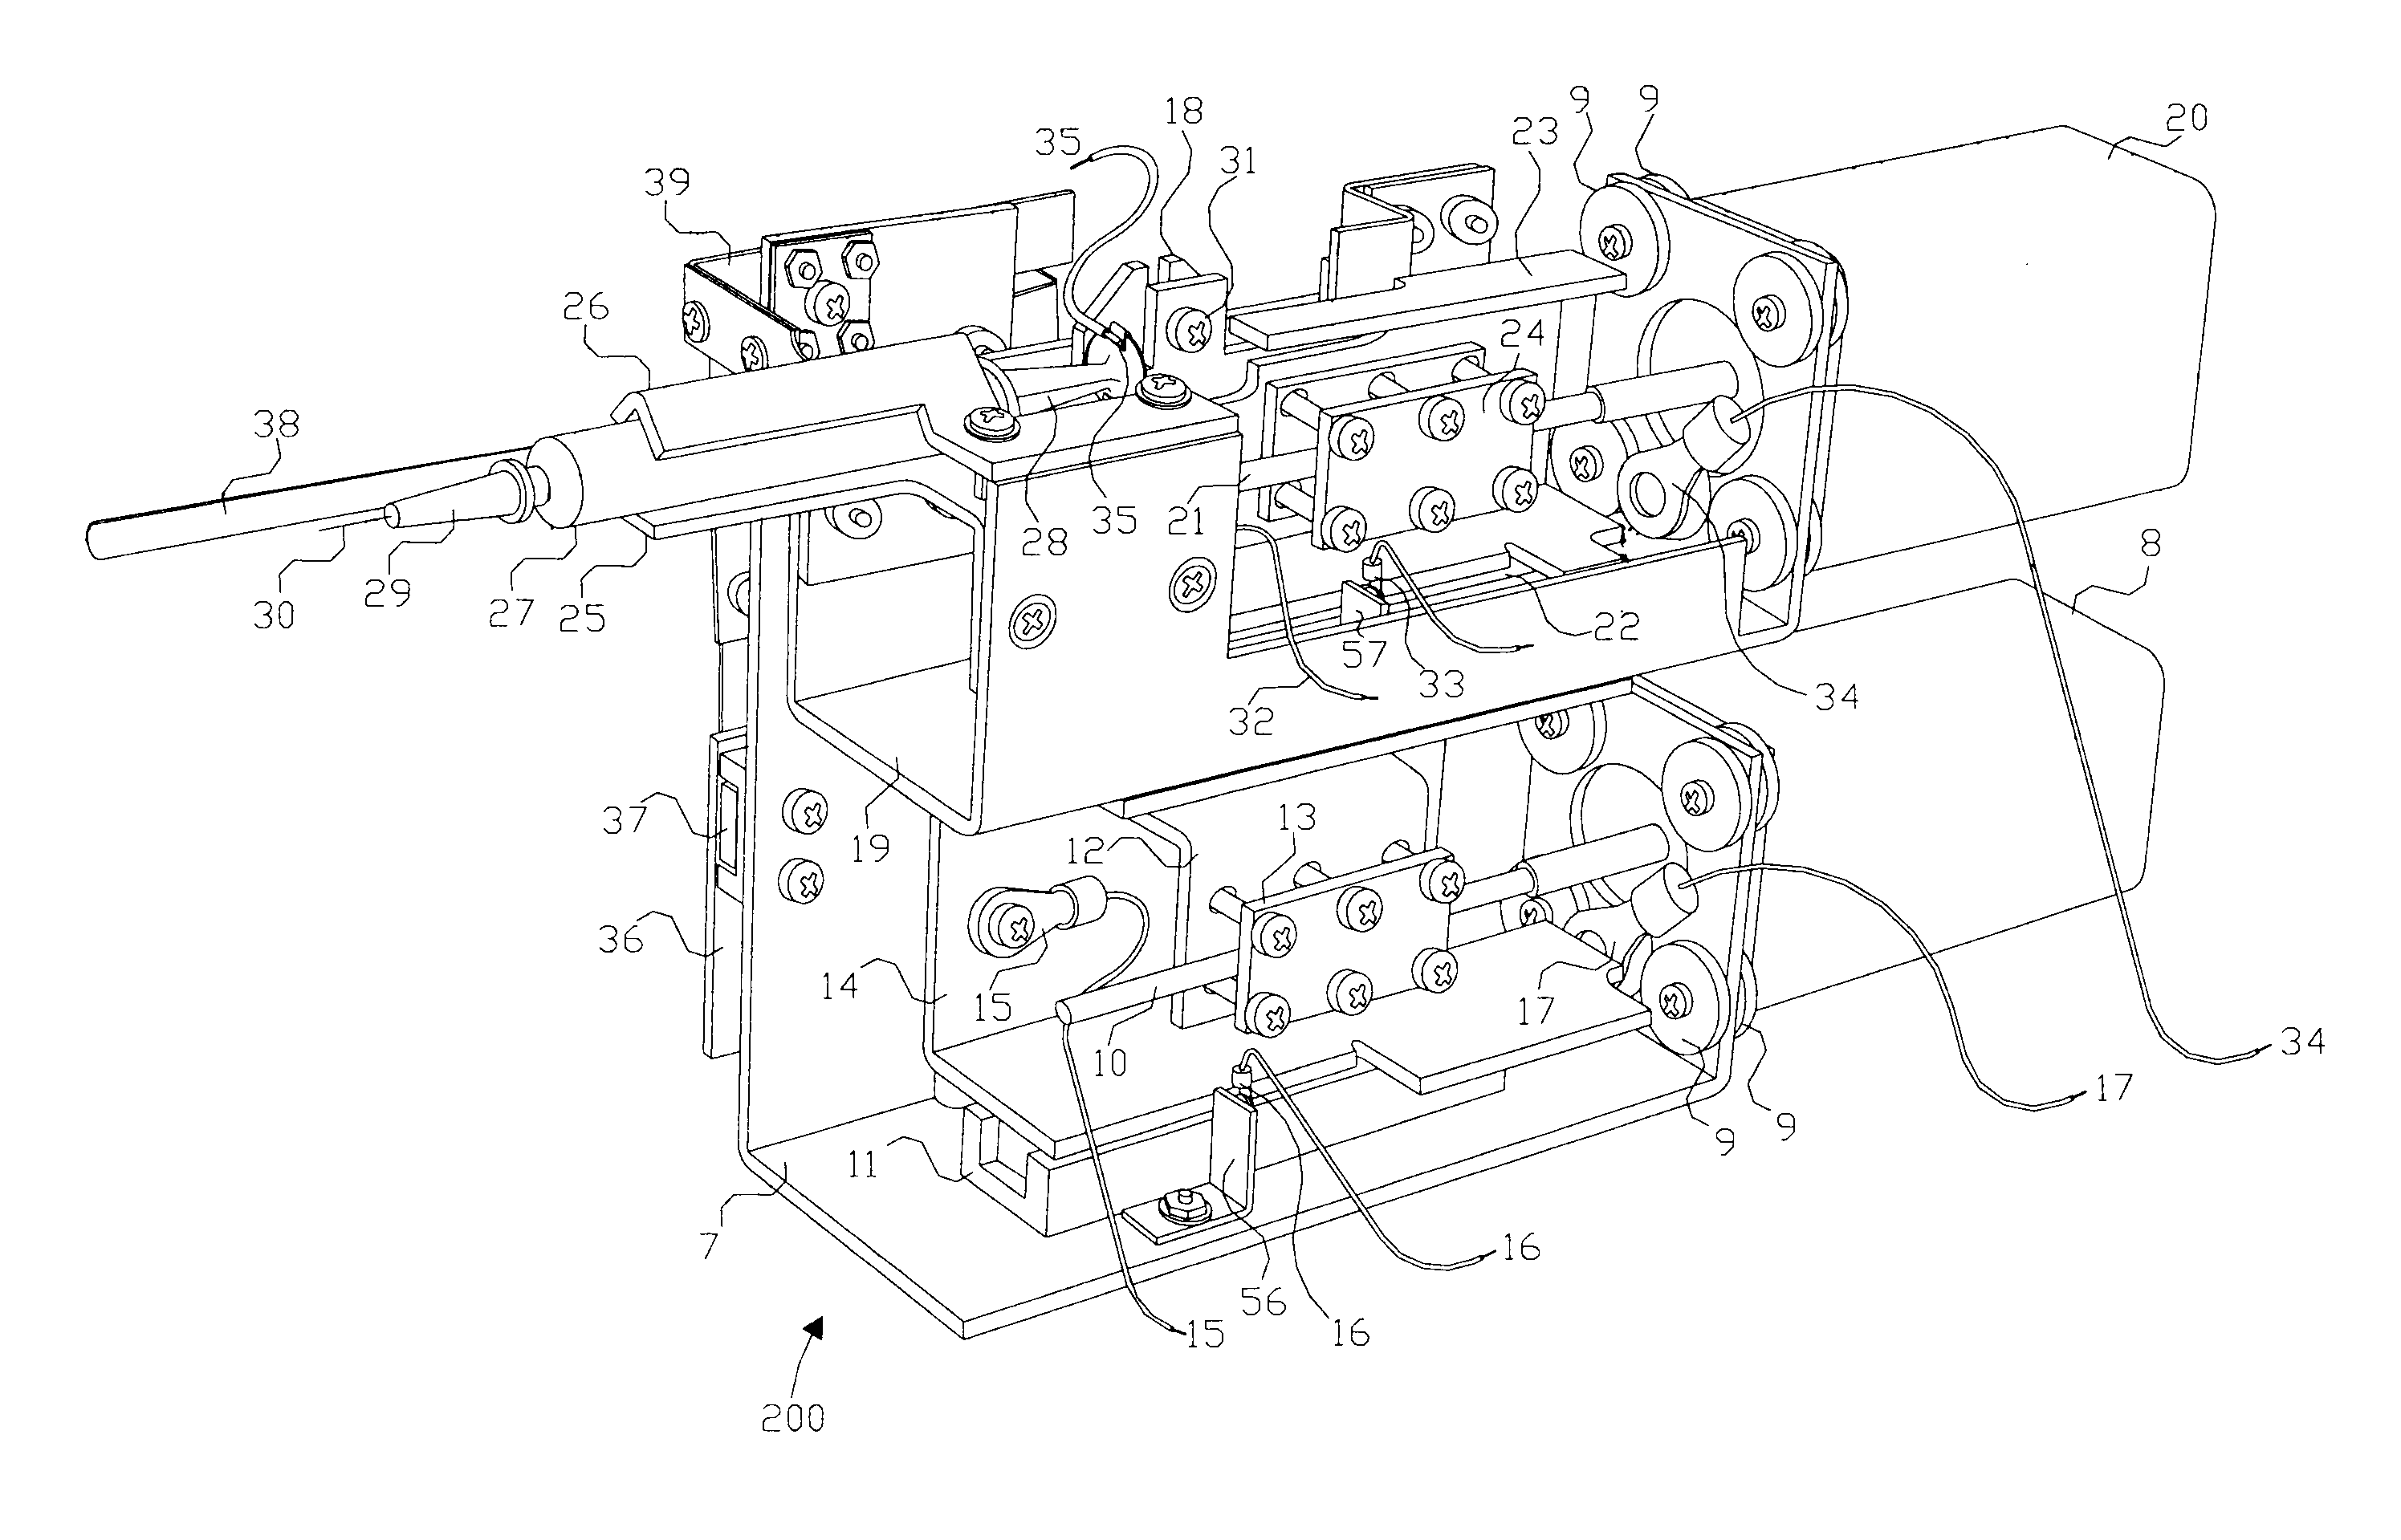 Device and Method for Injecting Fluids or Gels